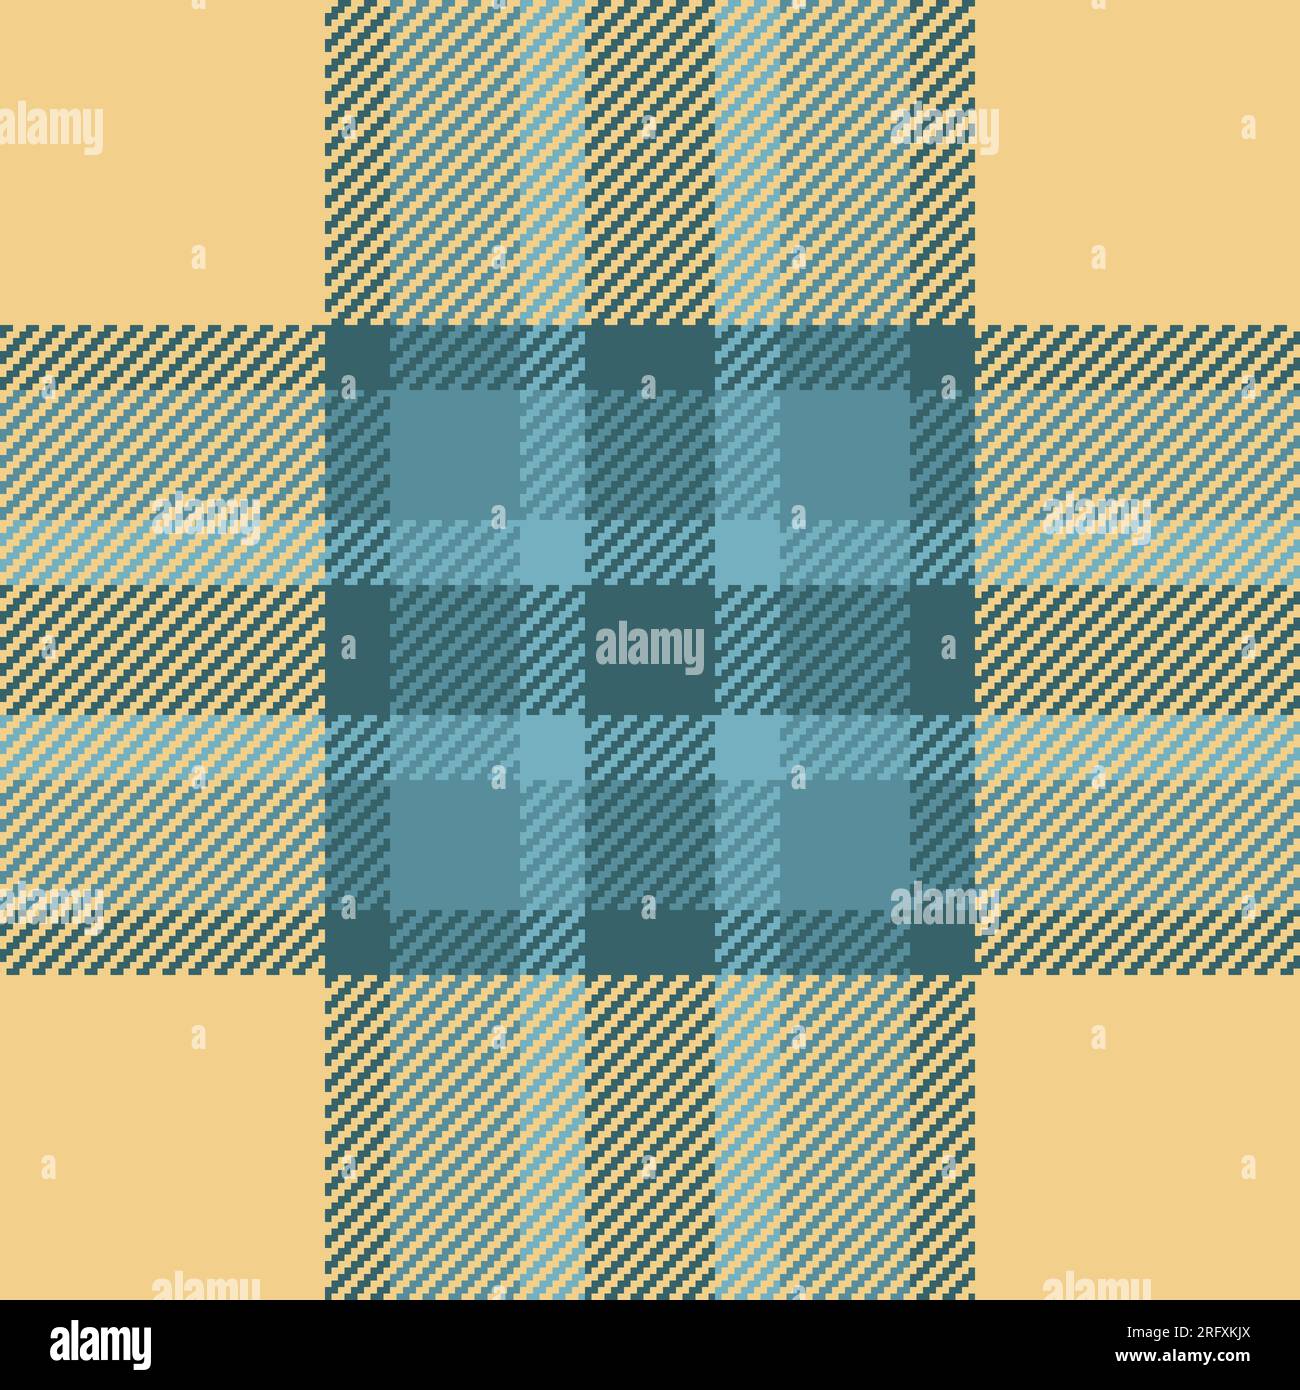 Pattern check vector of texture fabric textile with a seamless background tartan plaid in cyan and amber colors. Stock Vector